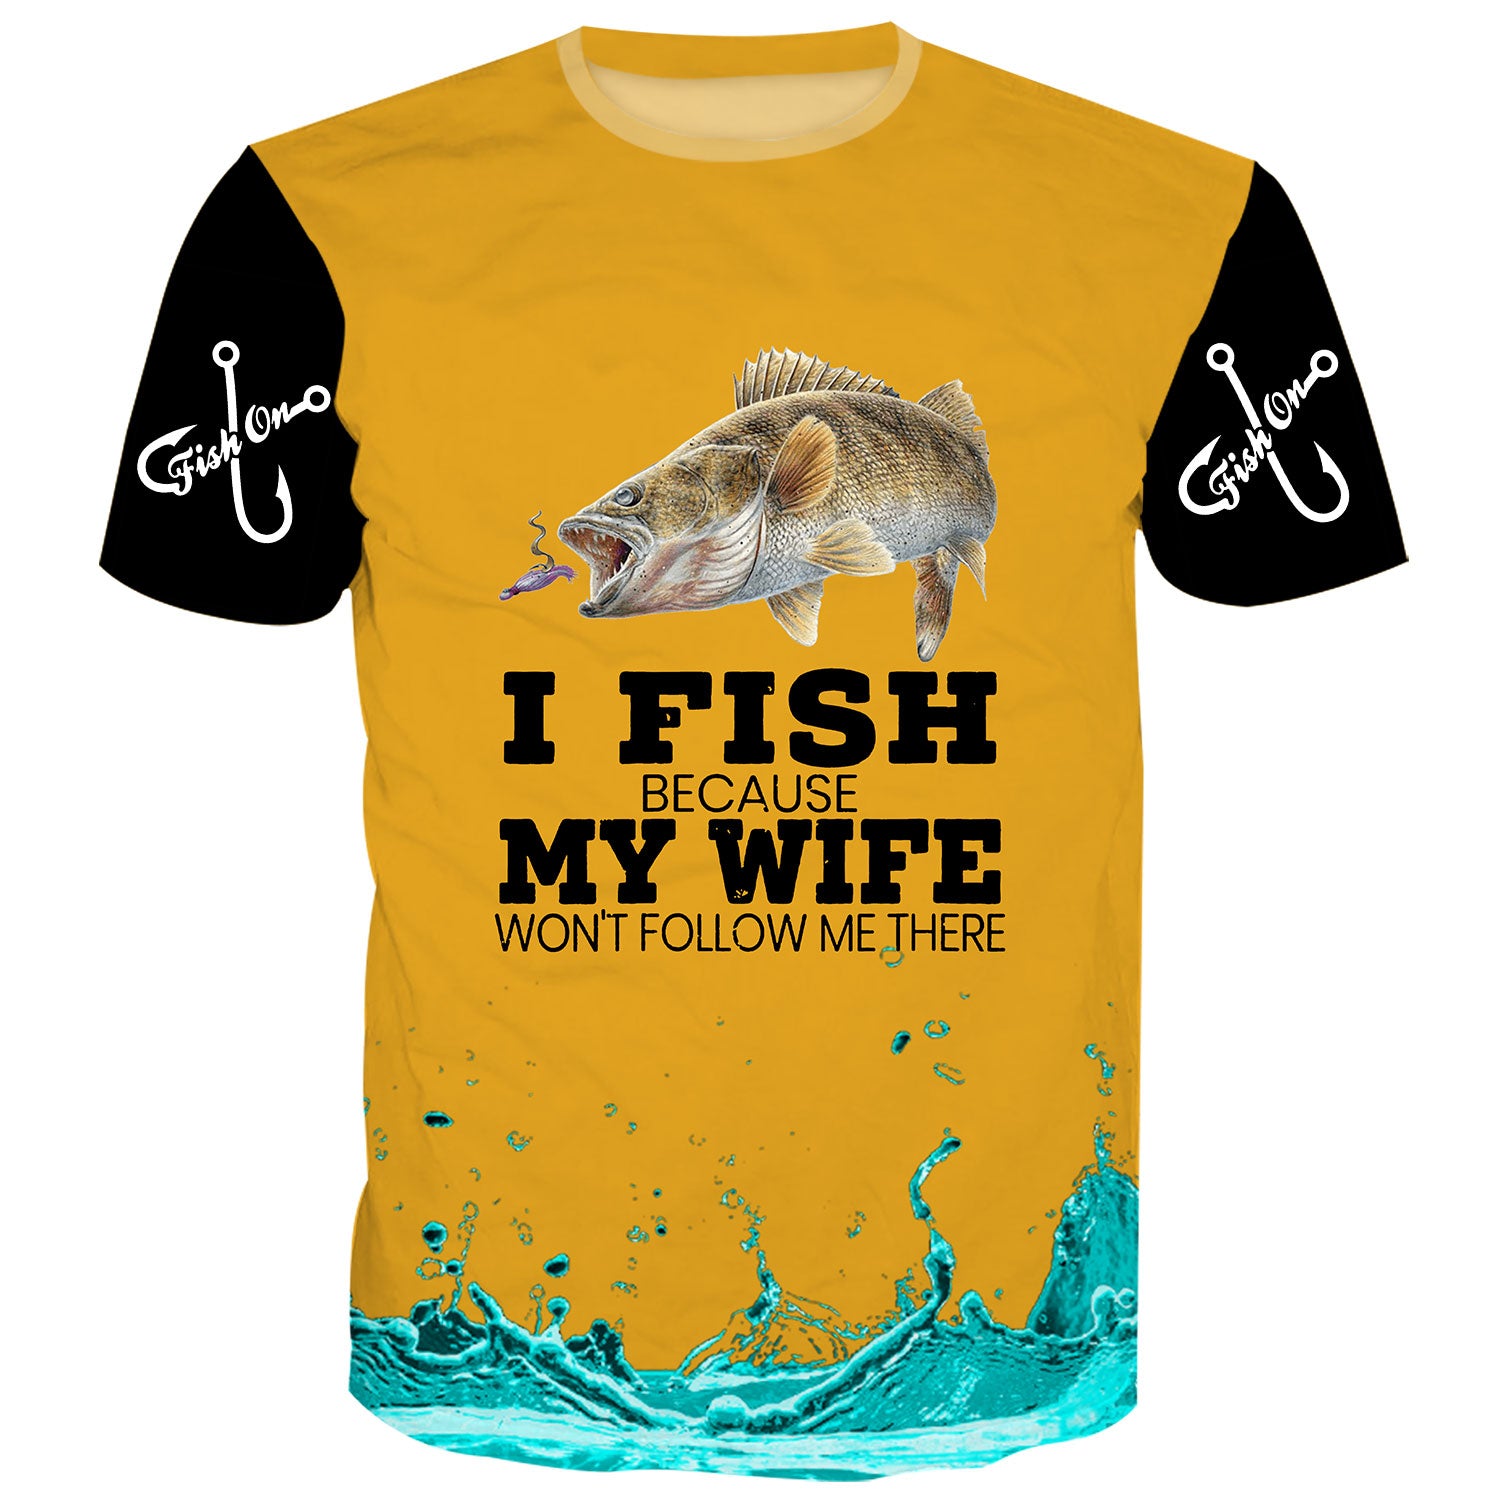 I Fish because My Wife won't follow me there